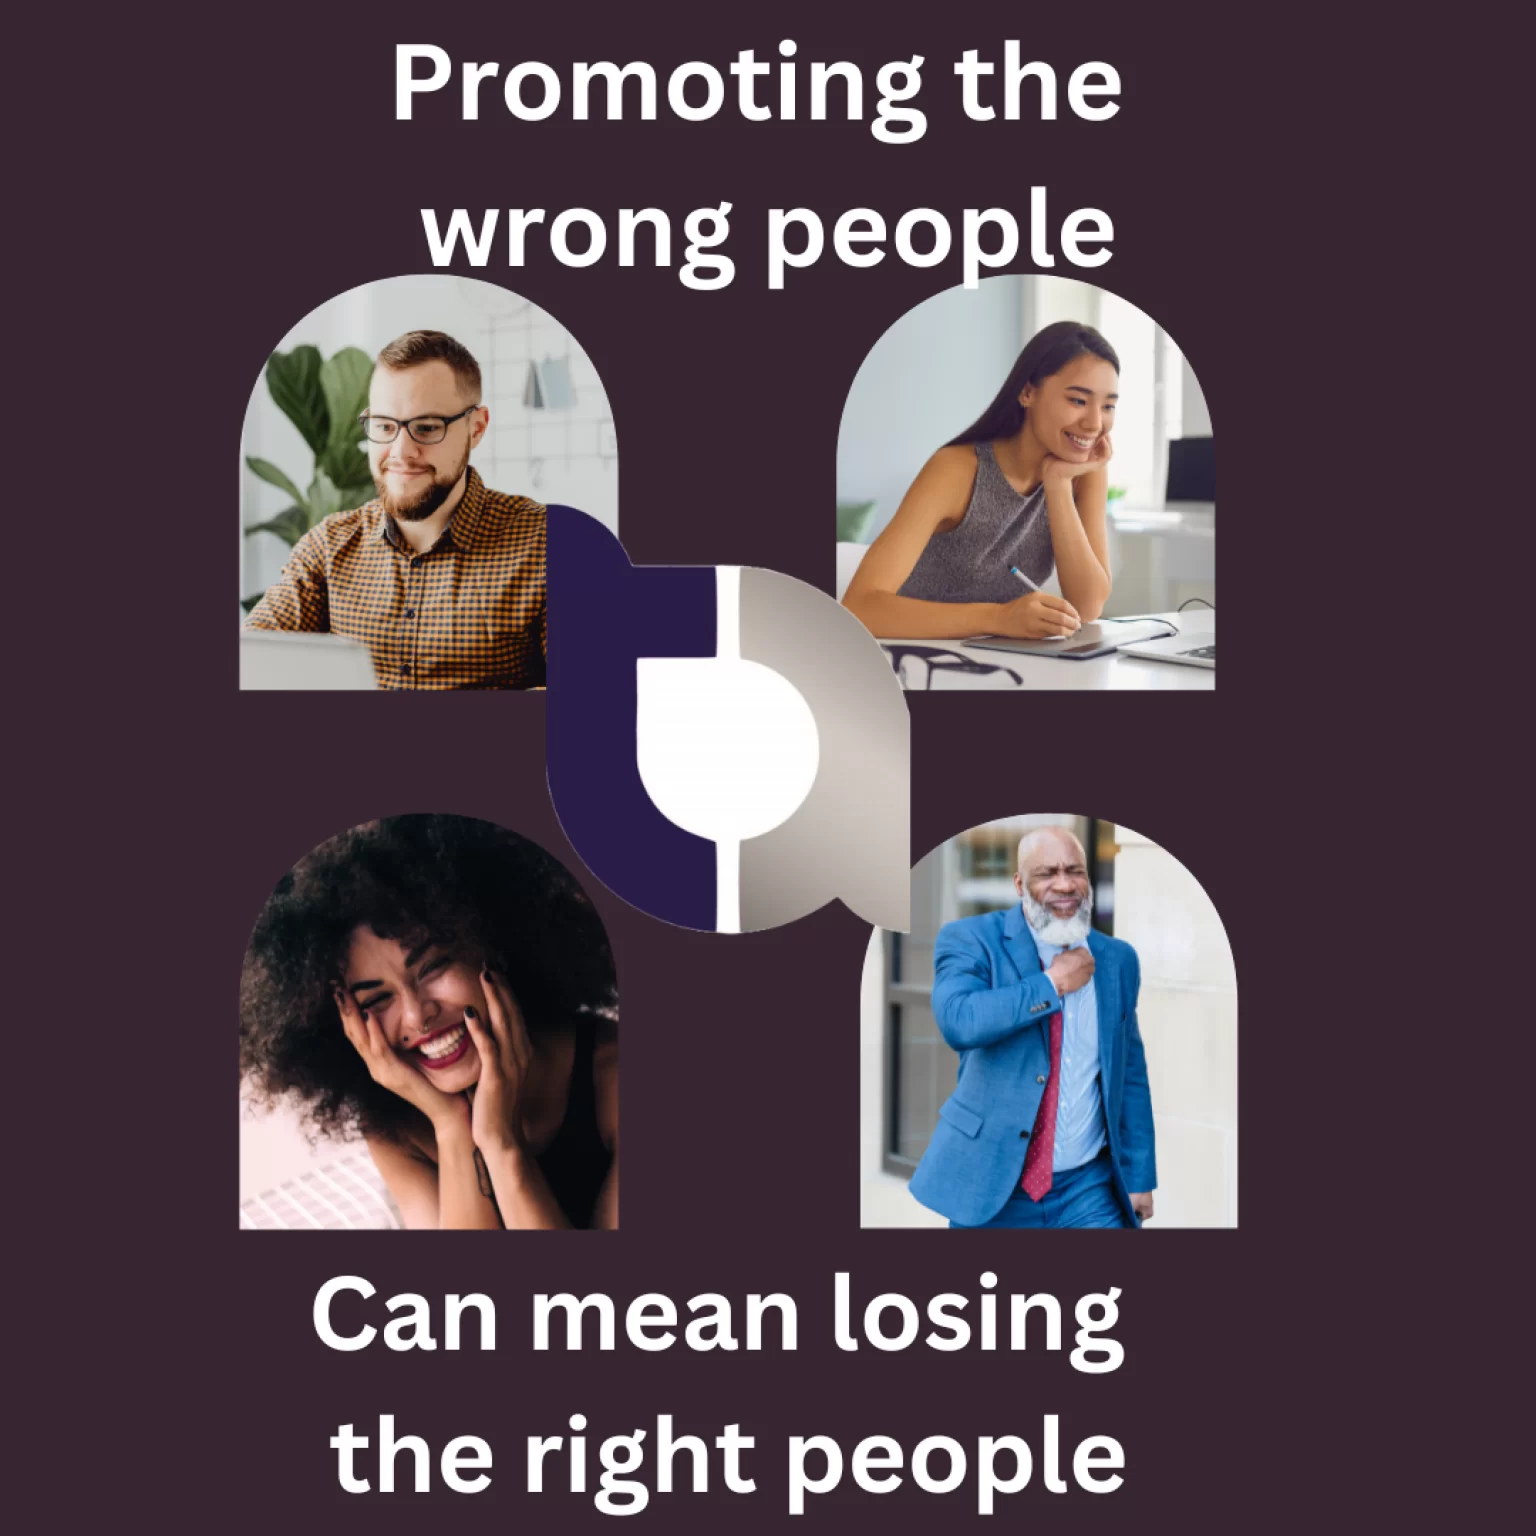 Hiring the wrong people can lose you the right people